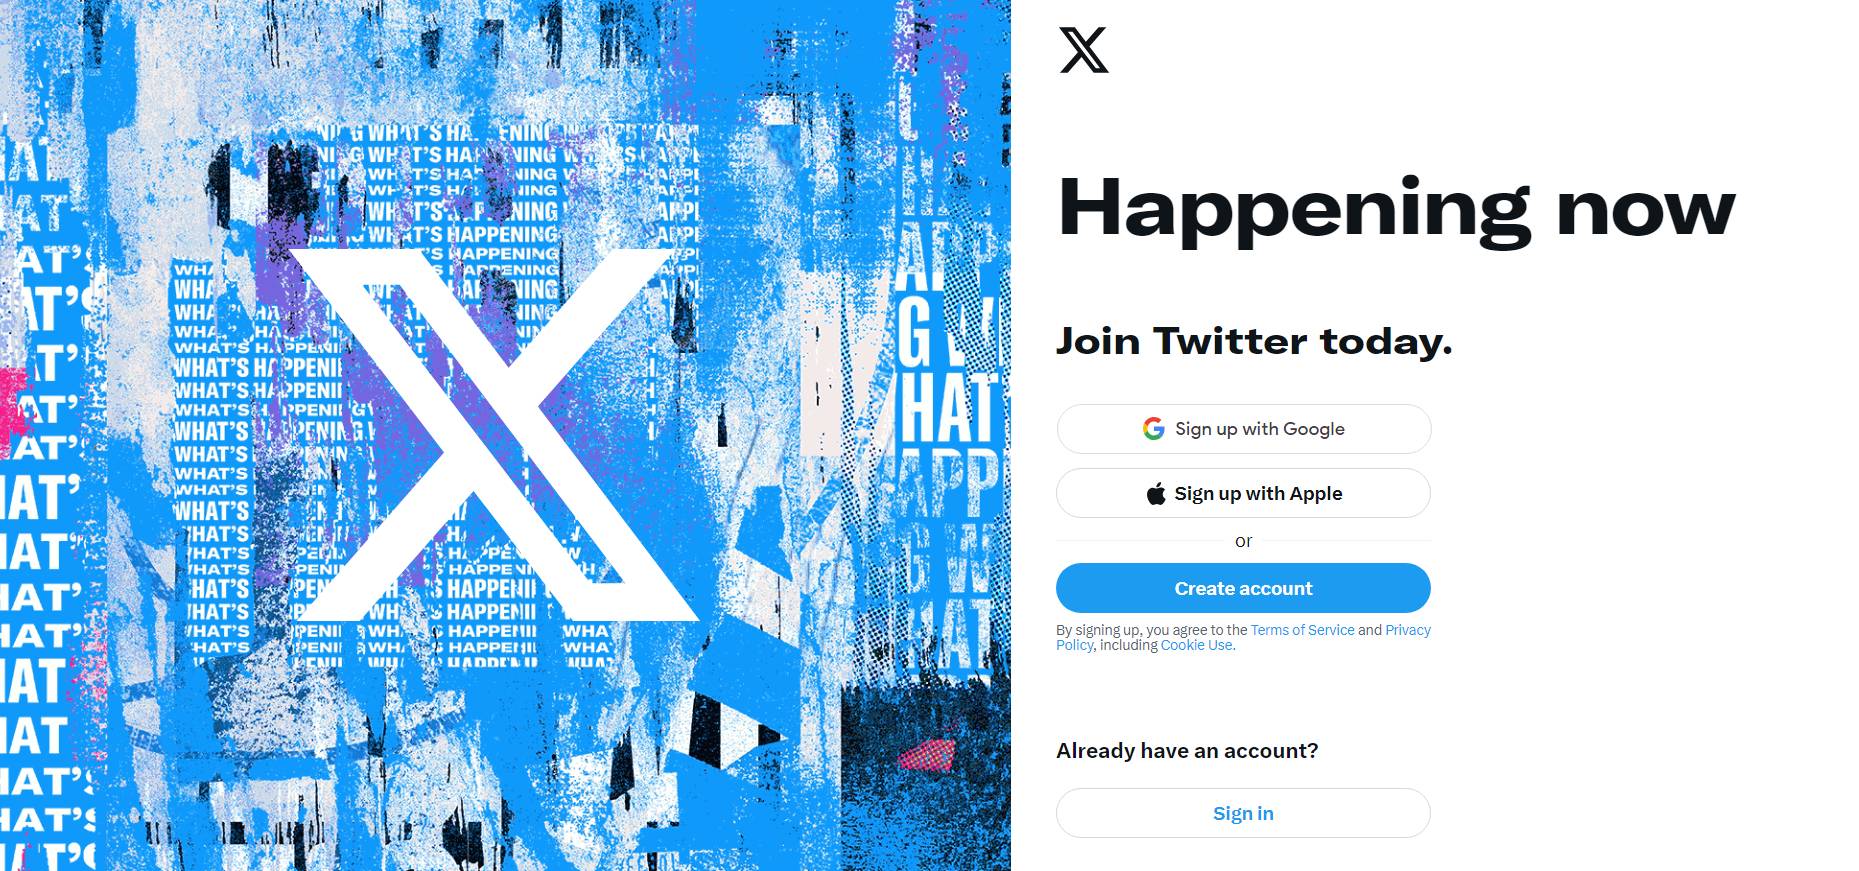 screenshot of Twitter after rebrand to X